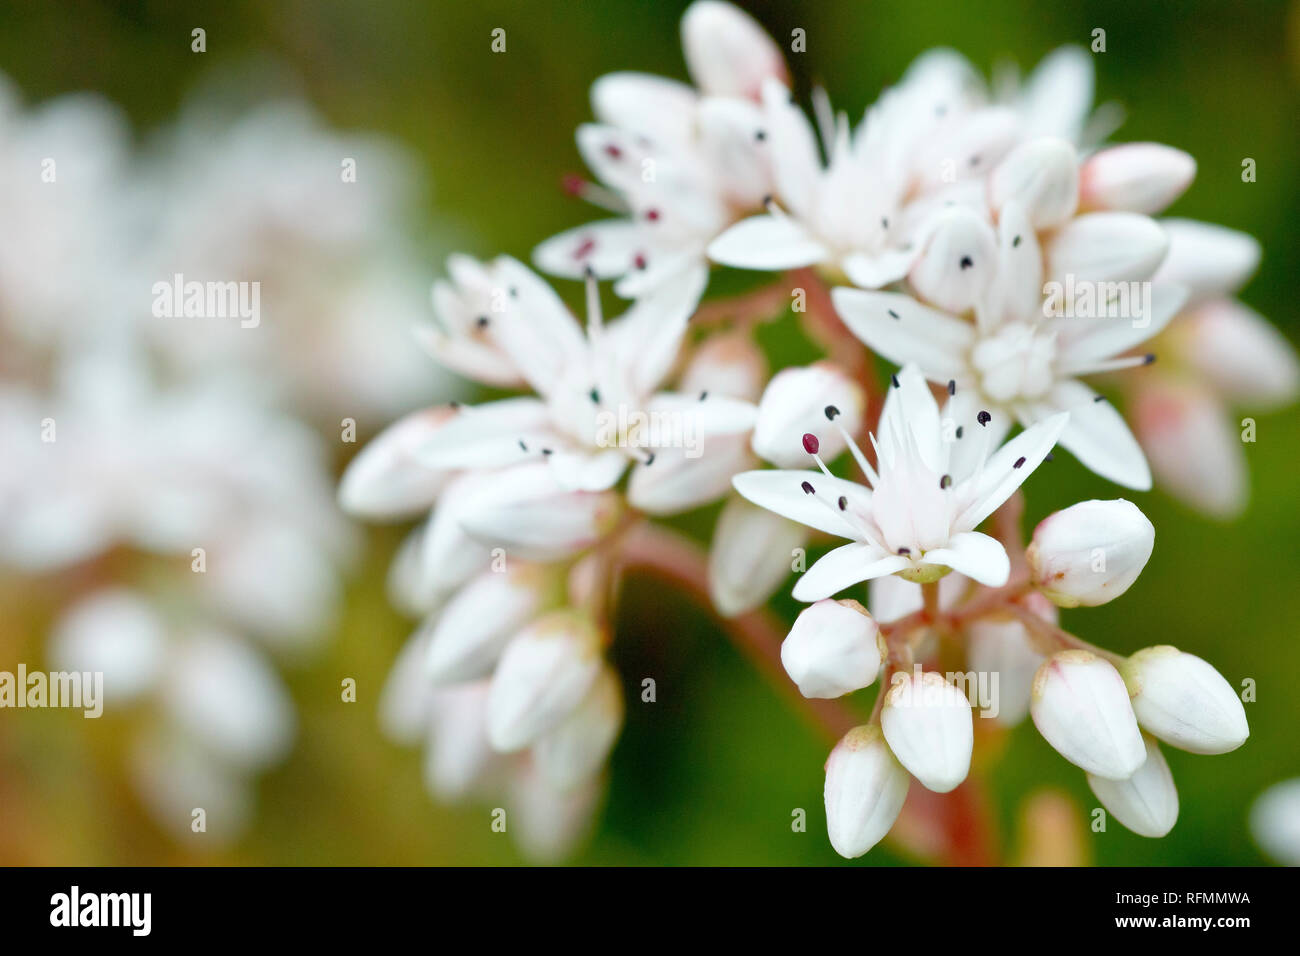 White Stonecrop (sedum album), close up of a cluster of flowers and buds with low depth of field. Stock Photo